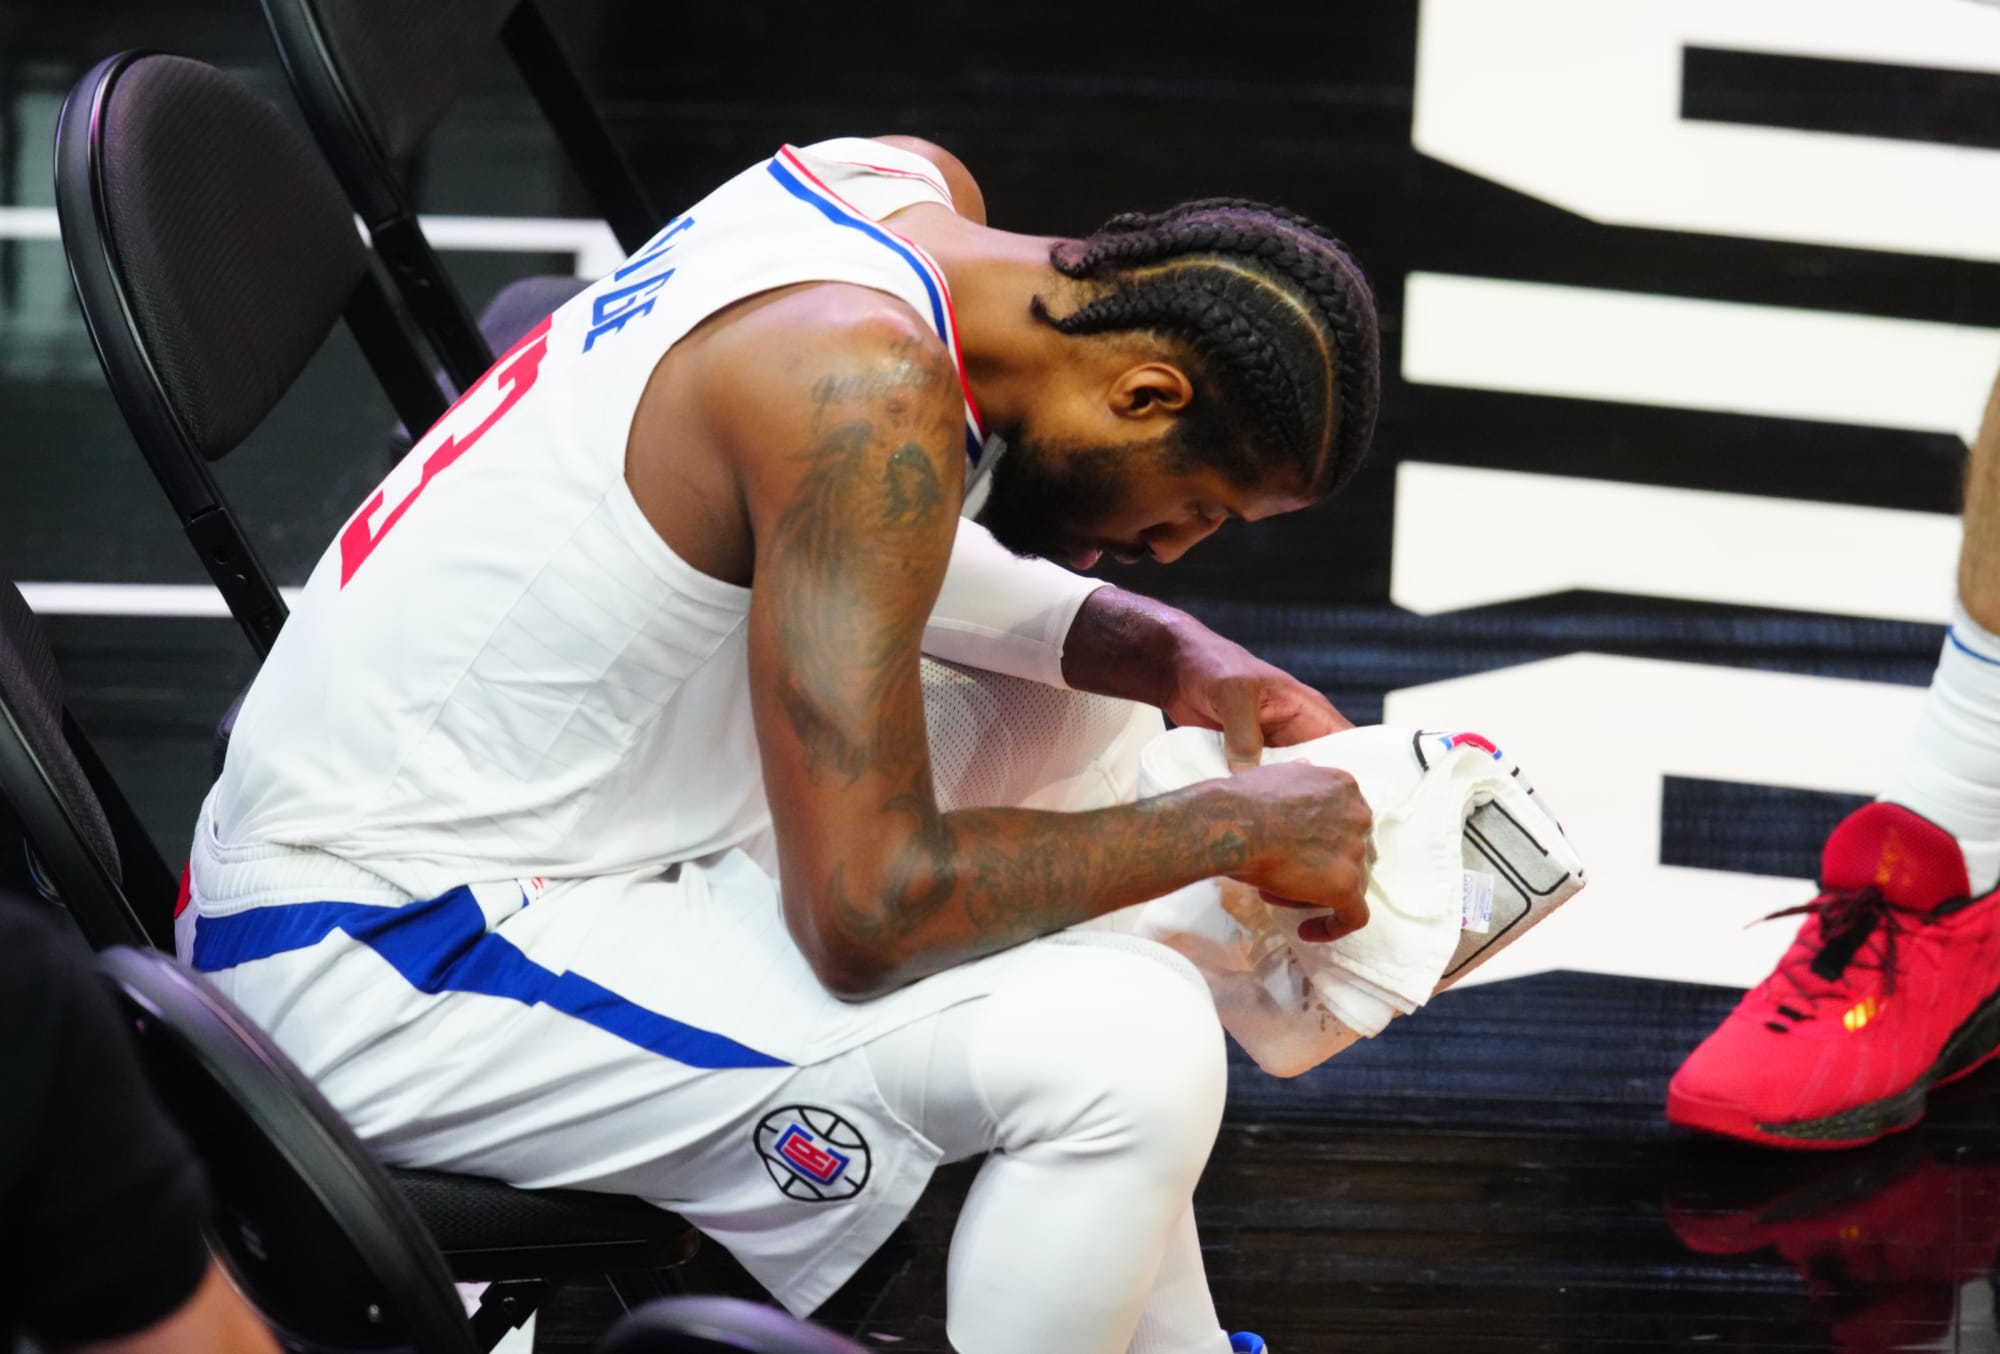 Tokyo Olympics 2020: Clippers Star Paul George Teases Shocking